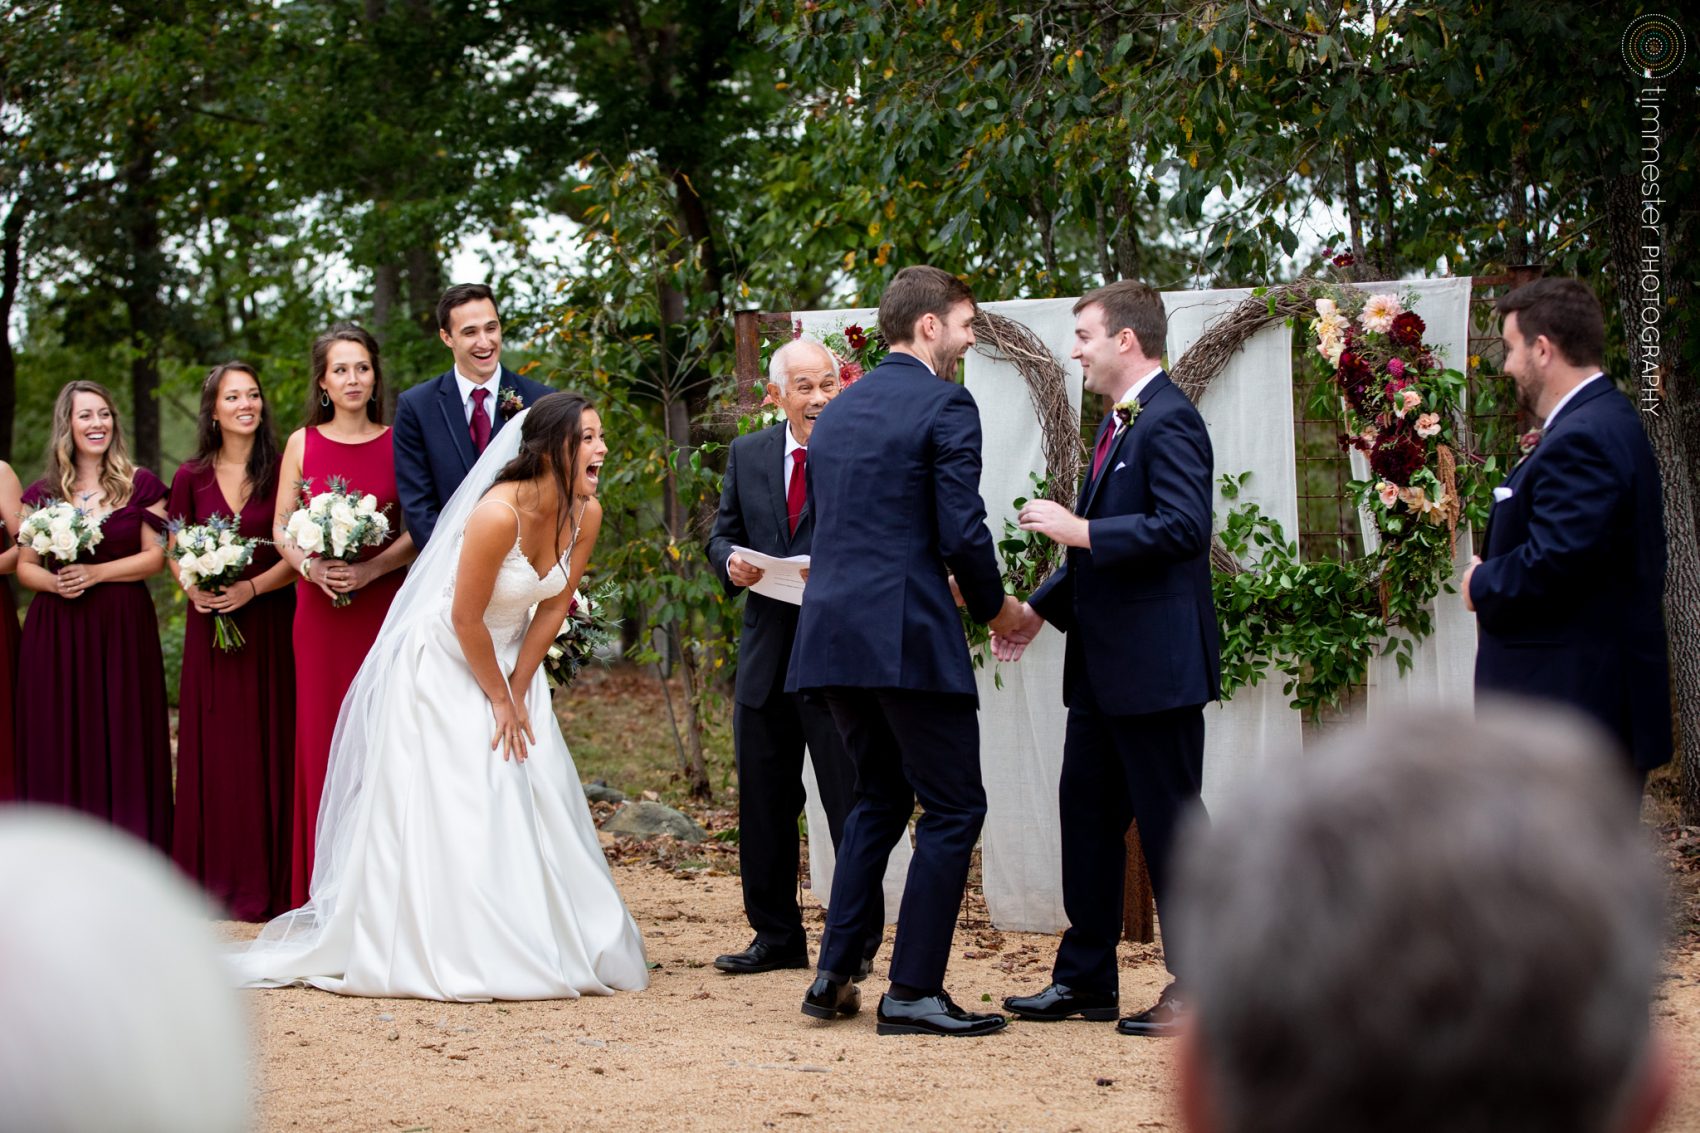 The best man dropped the rings during a wedding ceremony at Sassafras Fork Farm.